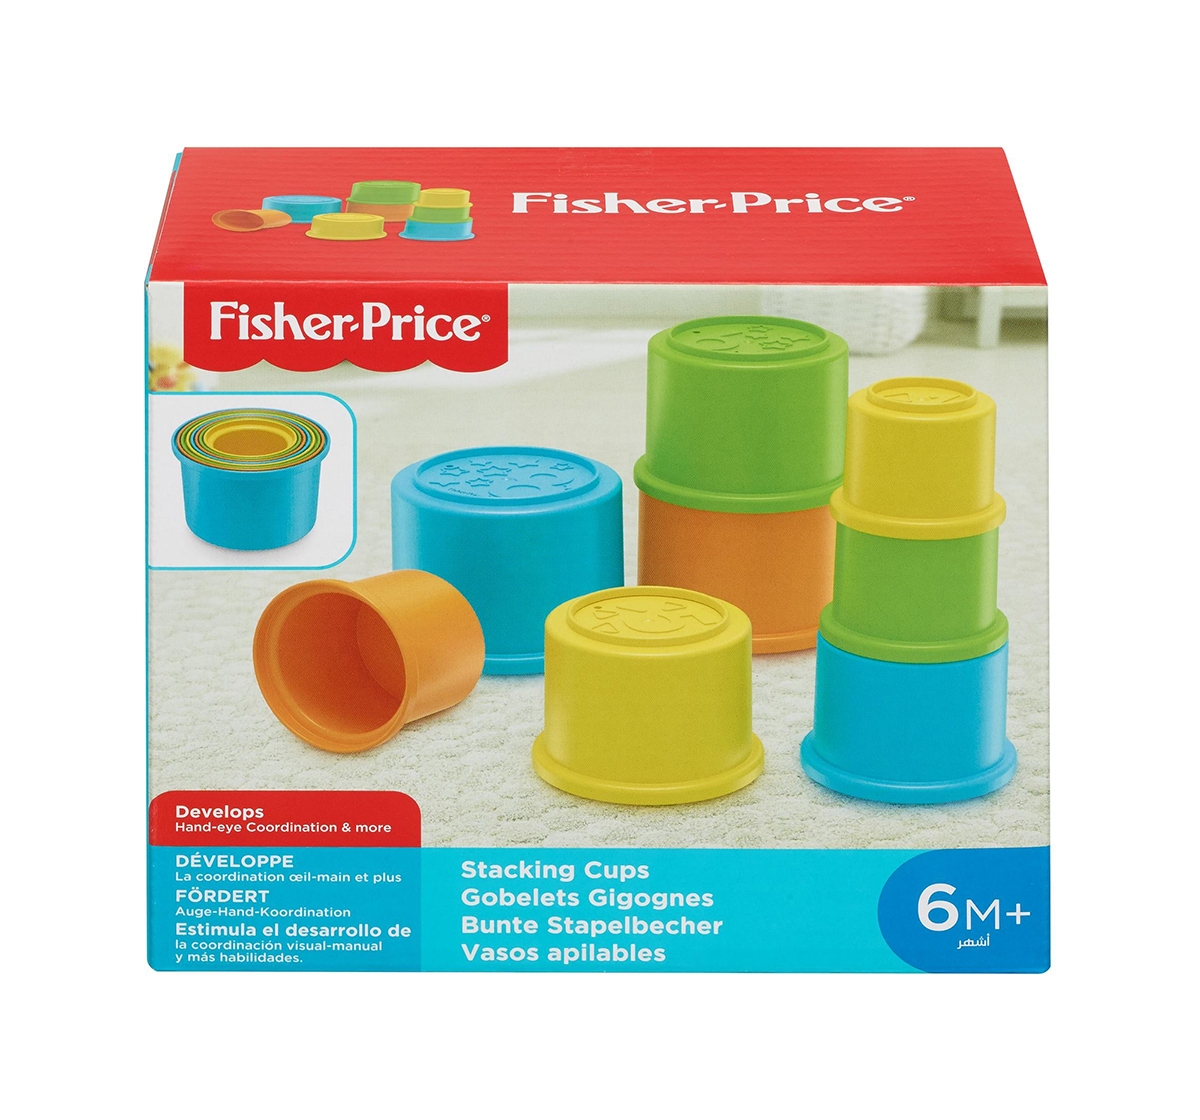 Fisher-Price | Fisher Price Stacking Cups Activity Toys for Kids age 6M+  6